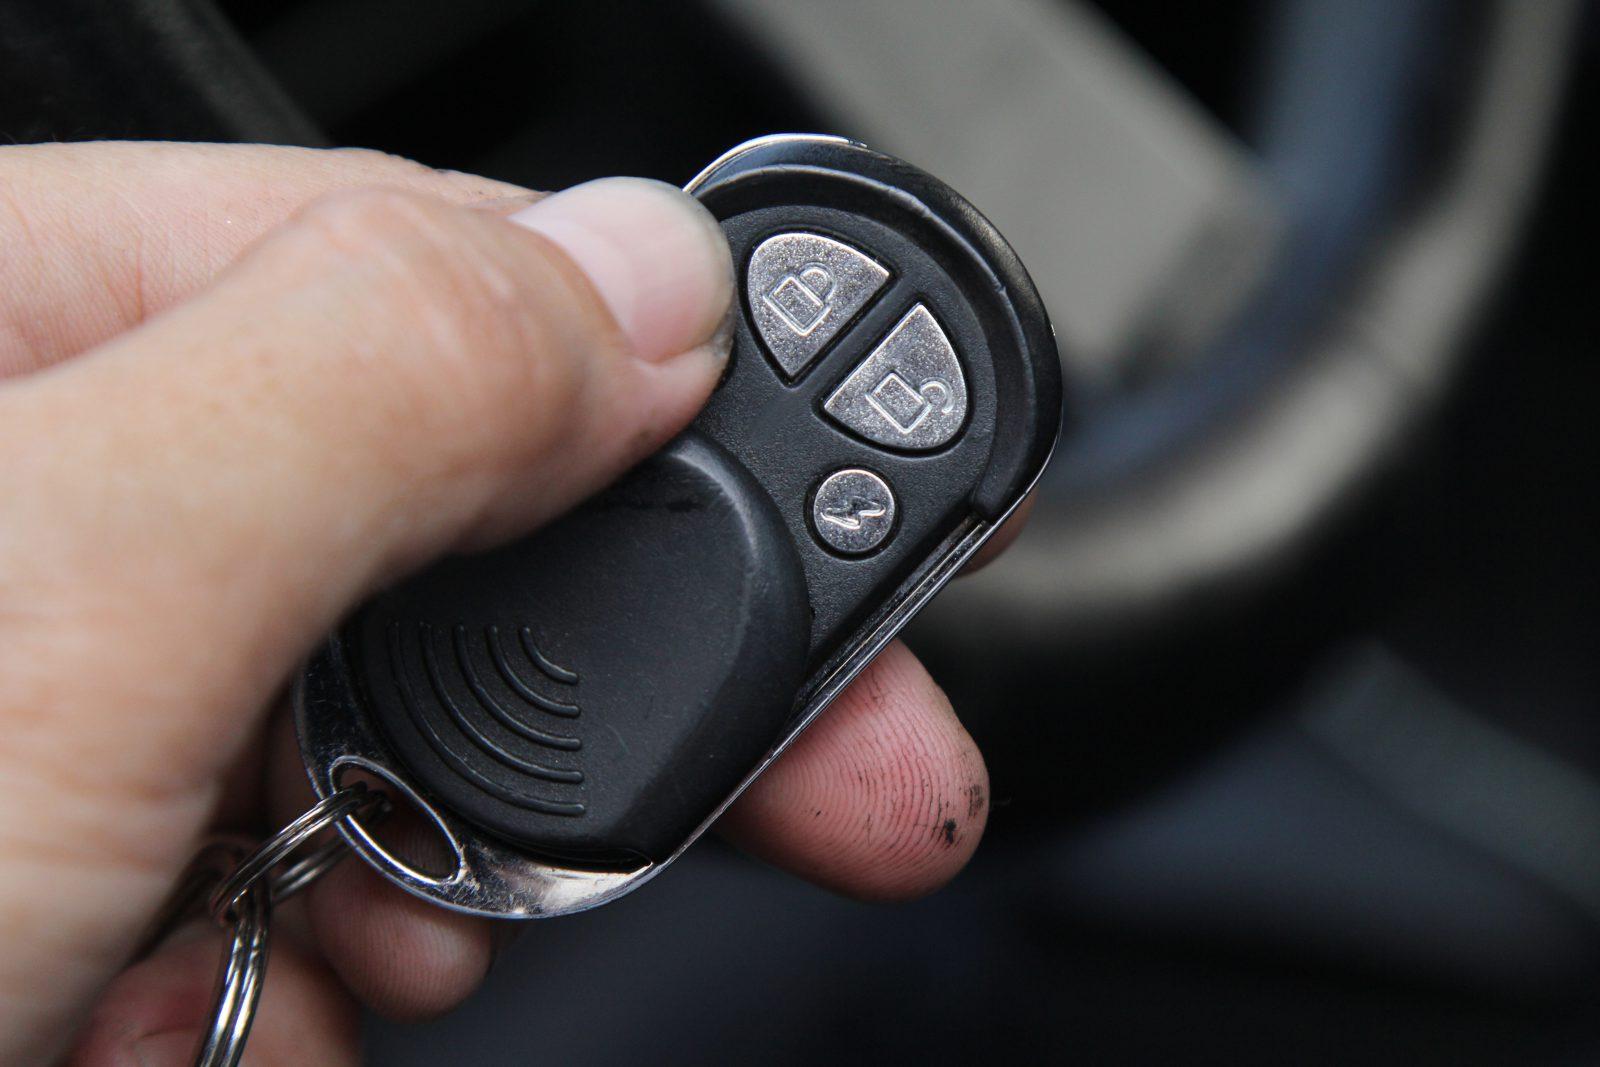 How To Turn Off a Car Alarm – The Complete Guide